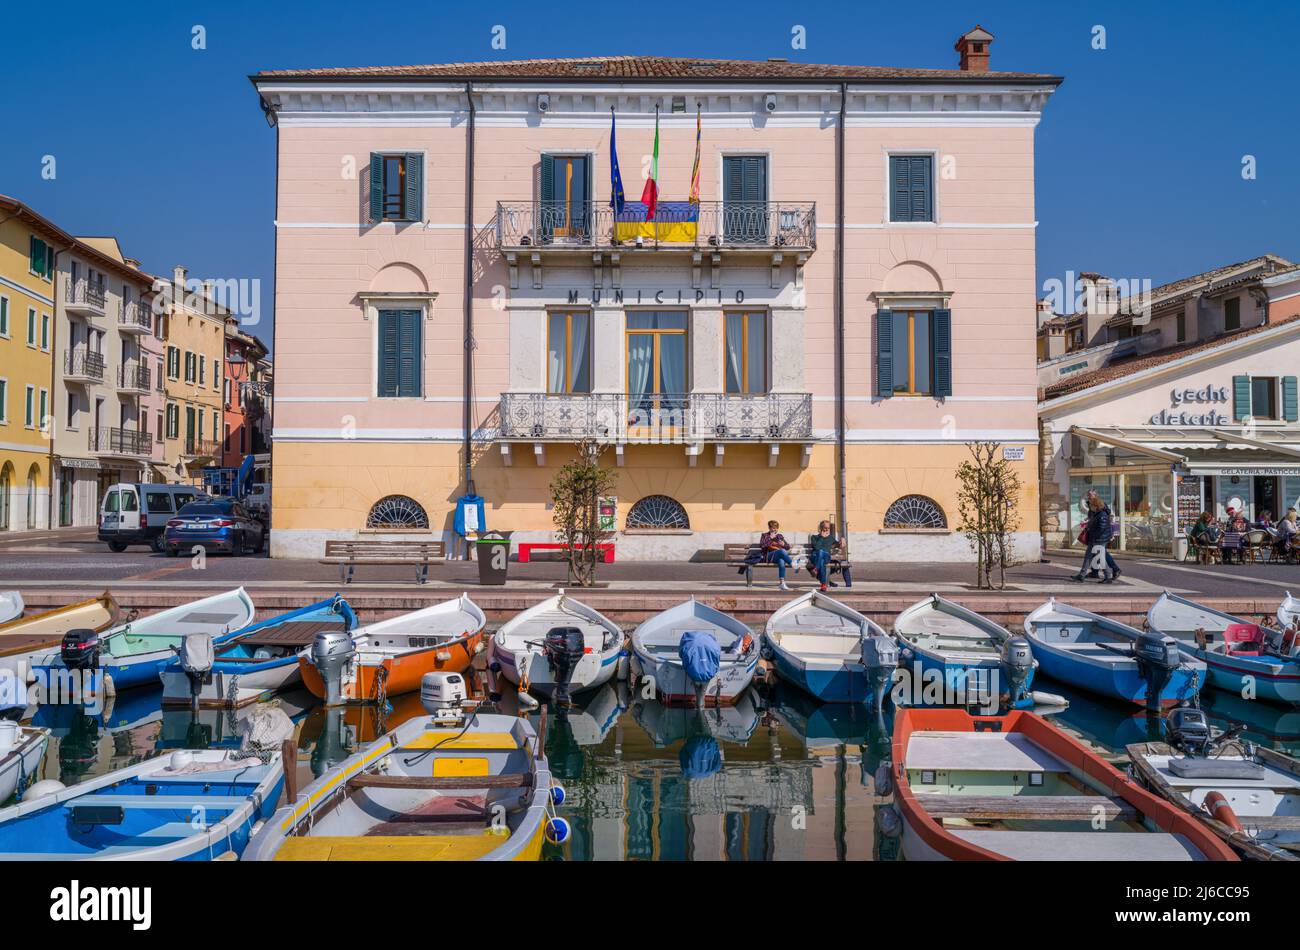 Bardolino, Italy - March 10, 2022:  Boats in the old harbor with the city Hall and restaurants in the backgraund Stock Photo